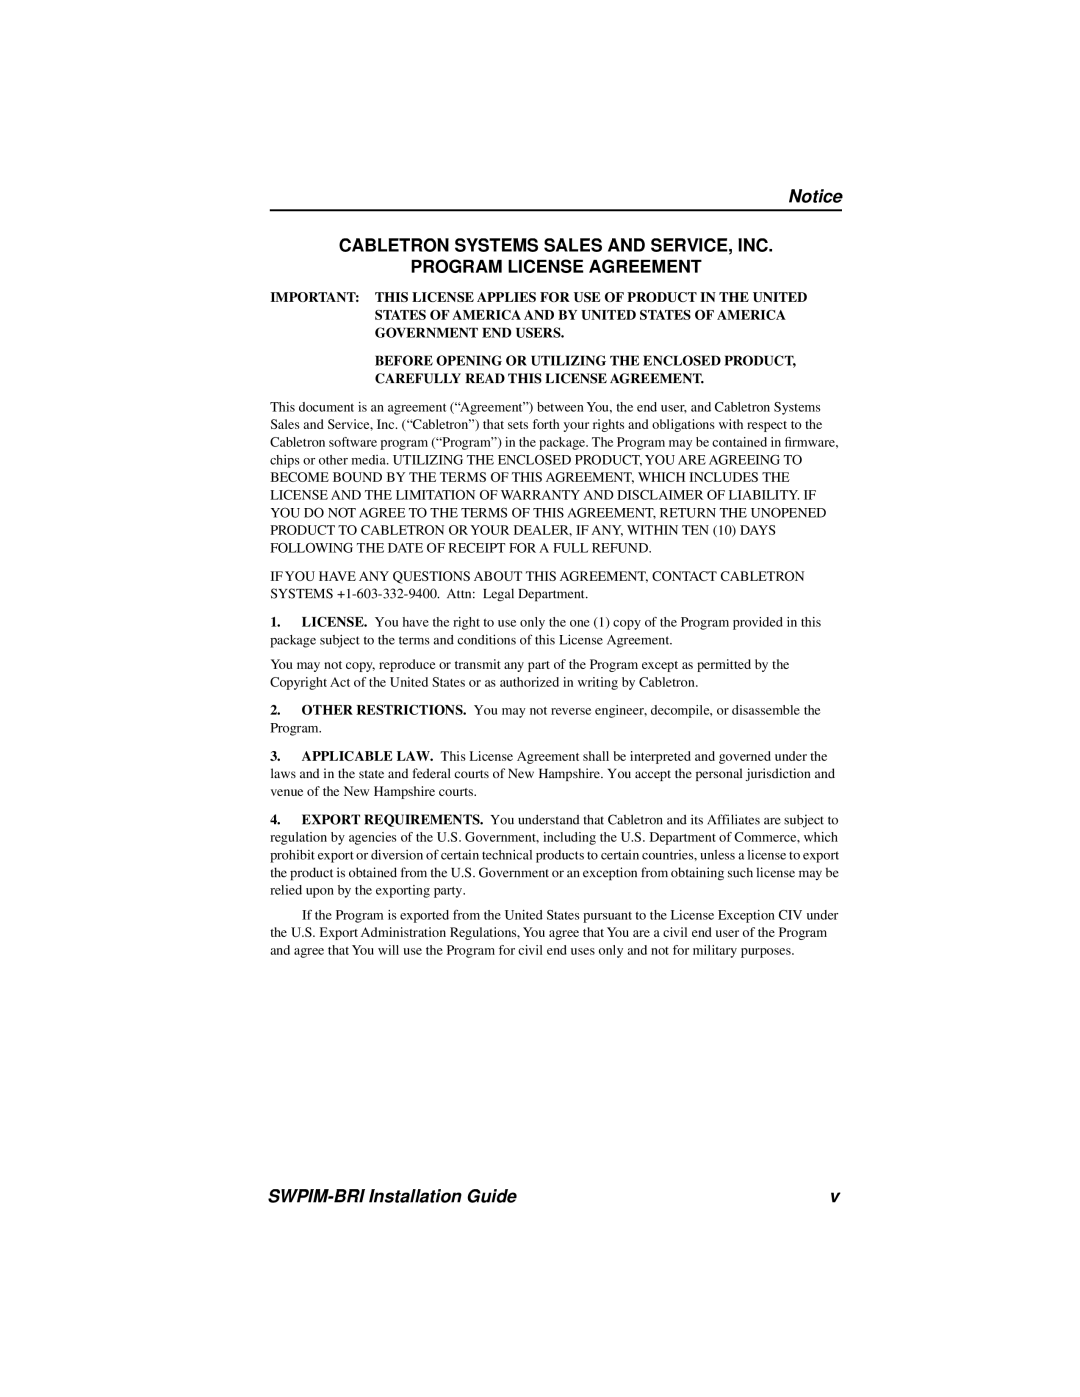 Cabletron Systems SWPIM-BRI manual Cabletron Systems Sales And Service, Inc Program License Agreement 